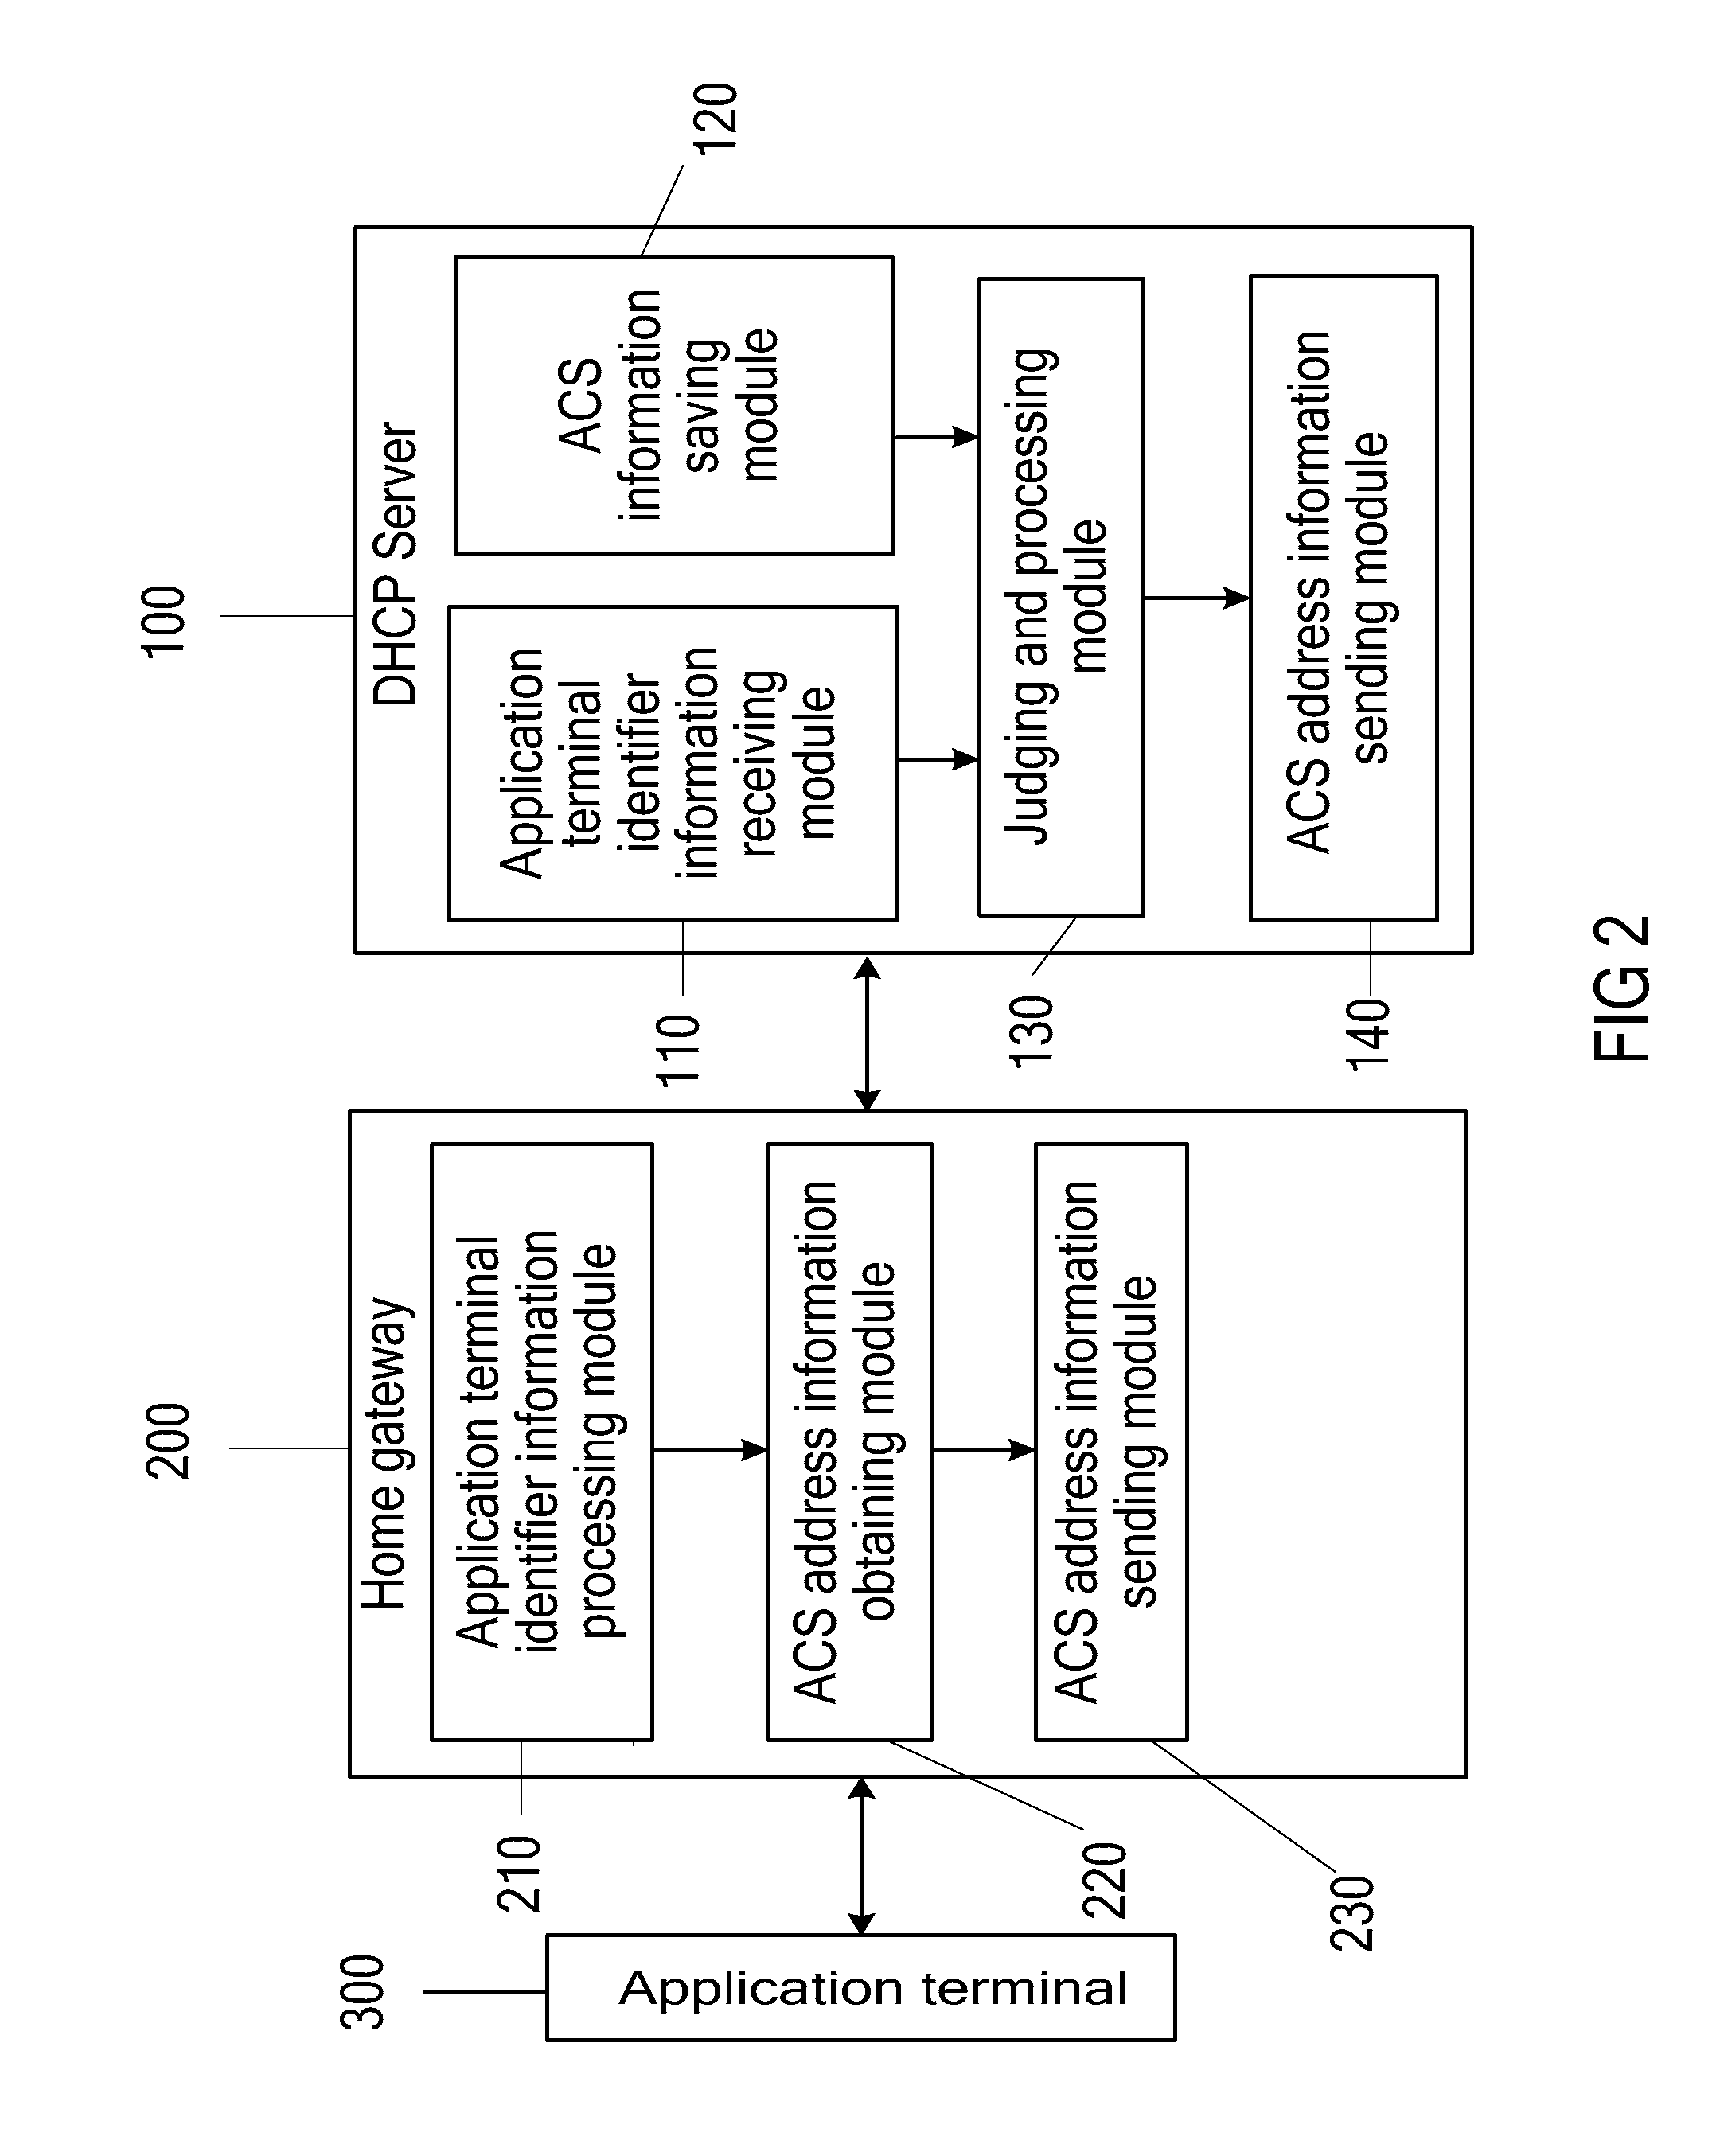 Device, system, and method for automatically configuring application terminals in home network